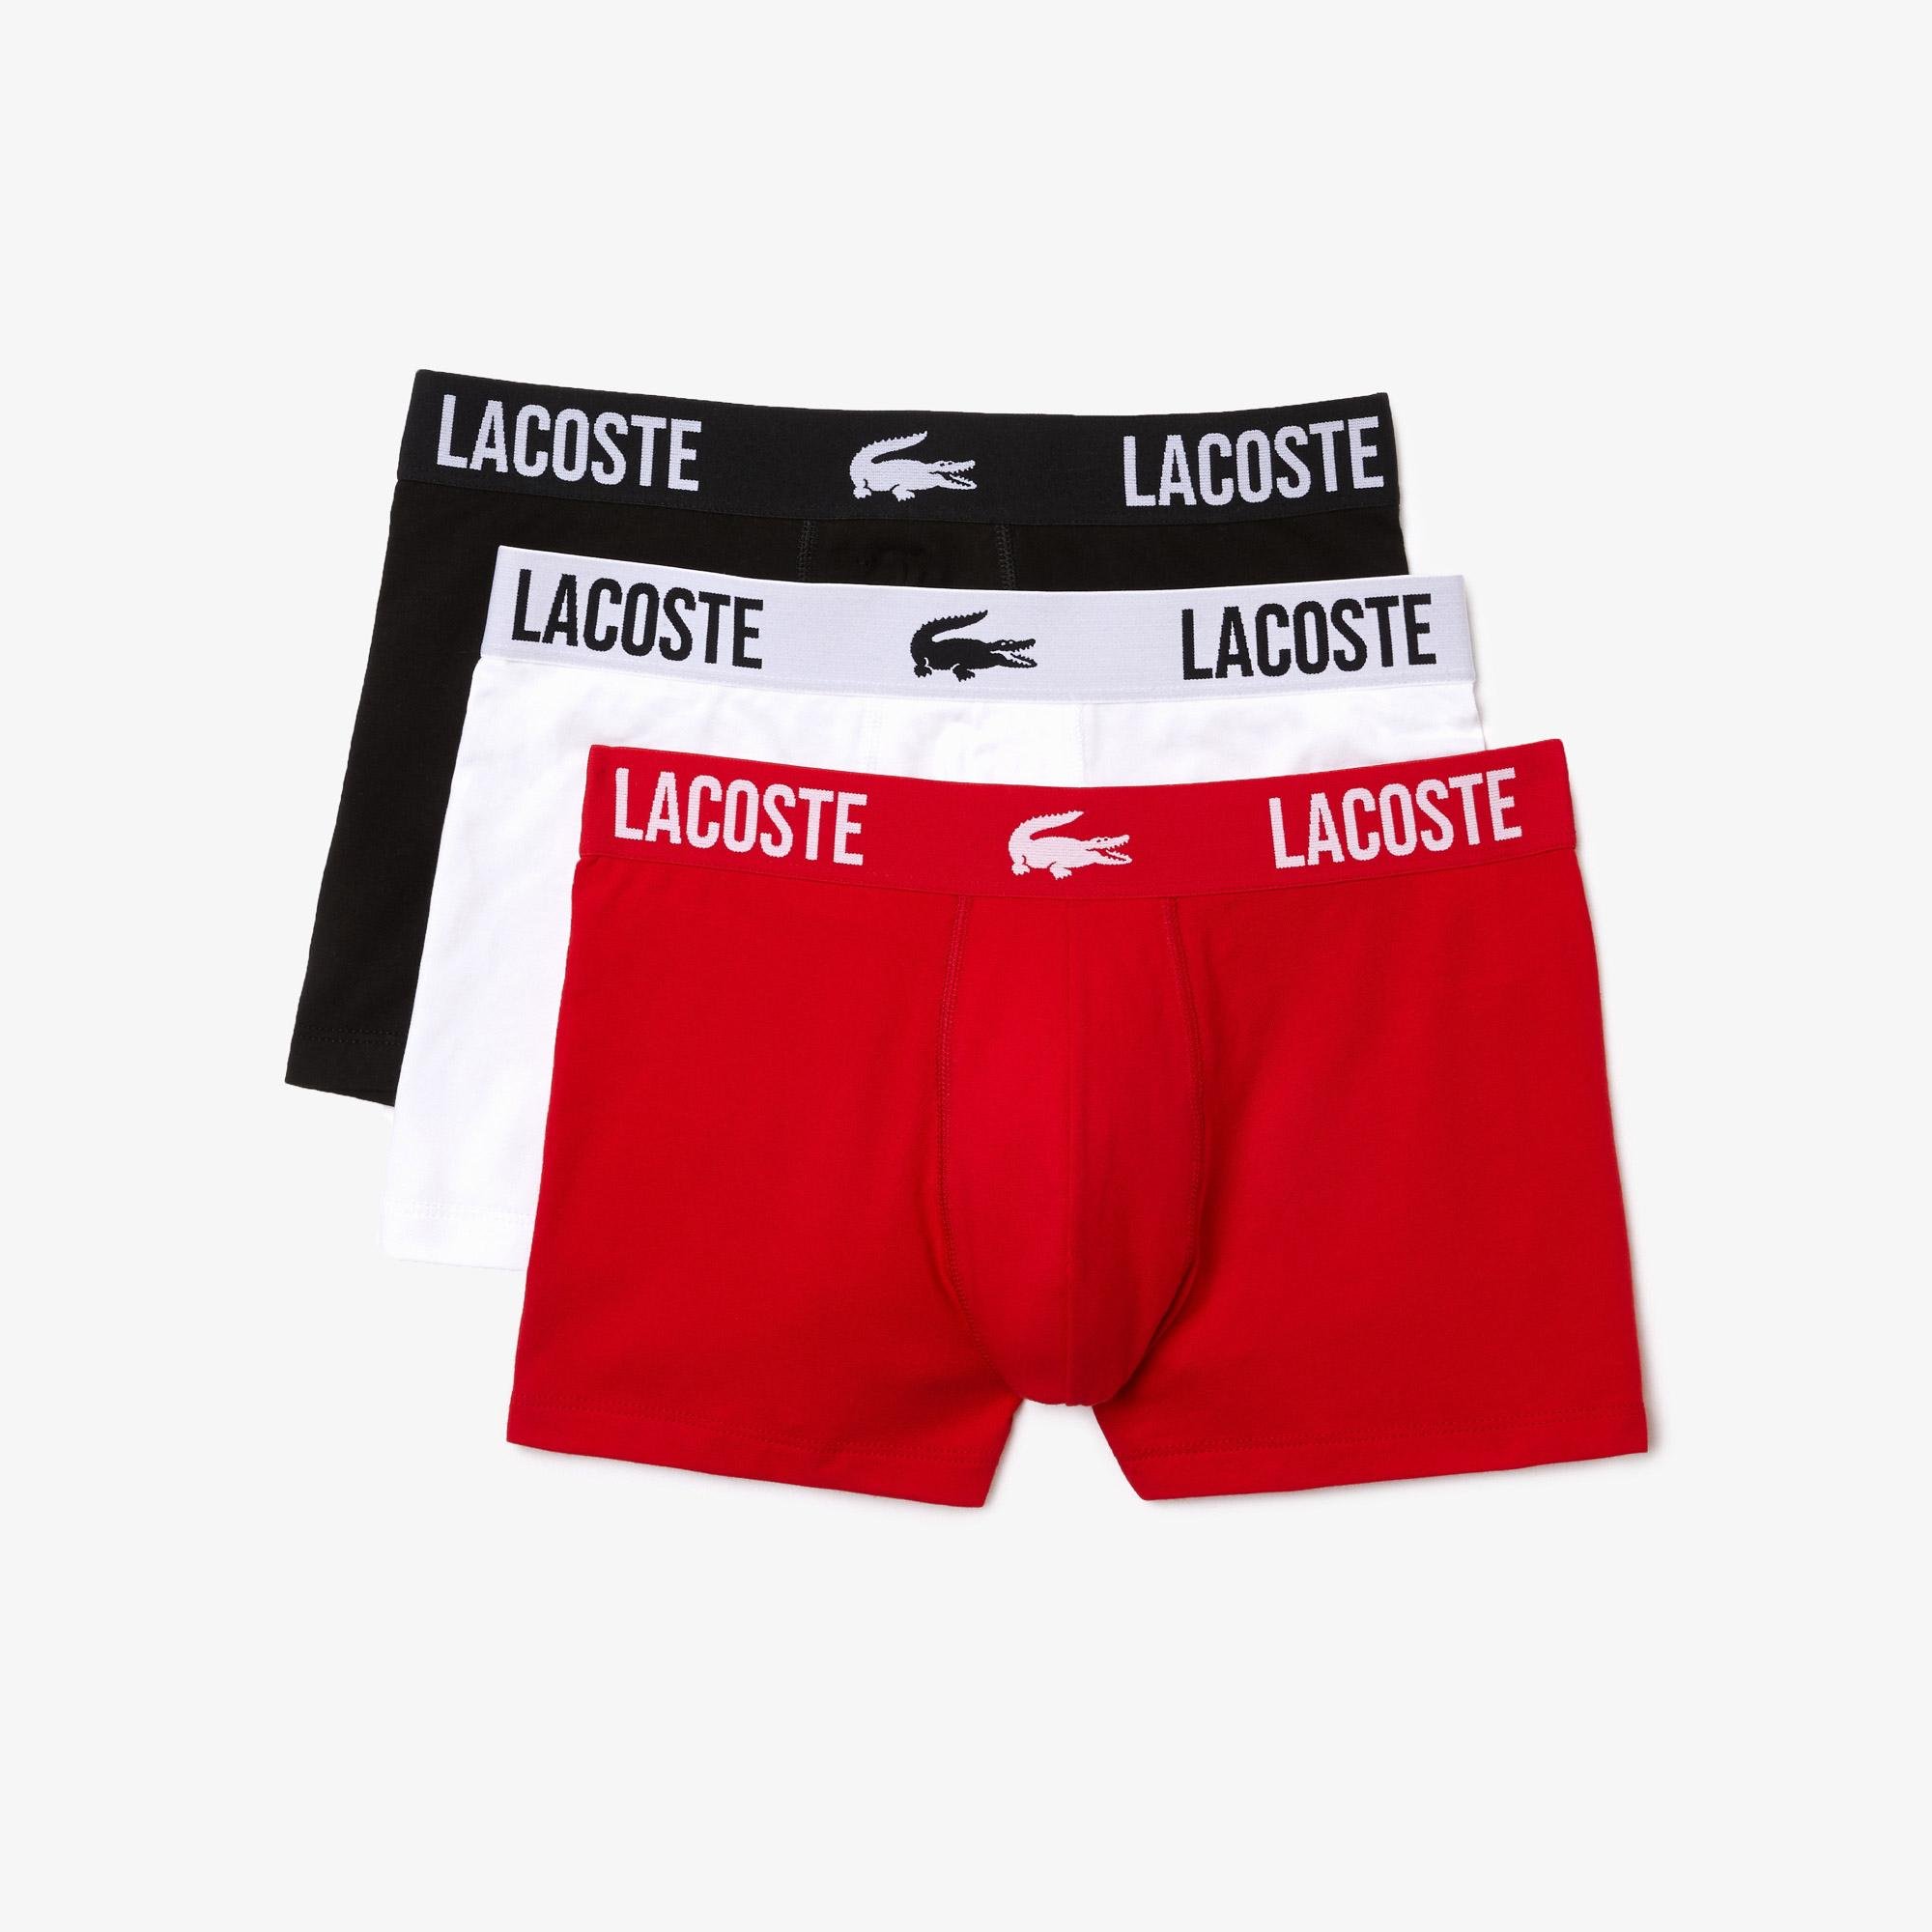 Lacoste Men's Branded Jersey Trunk Three-Pack